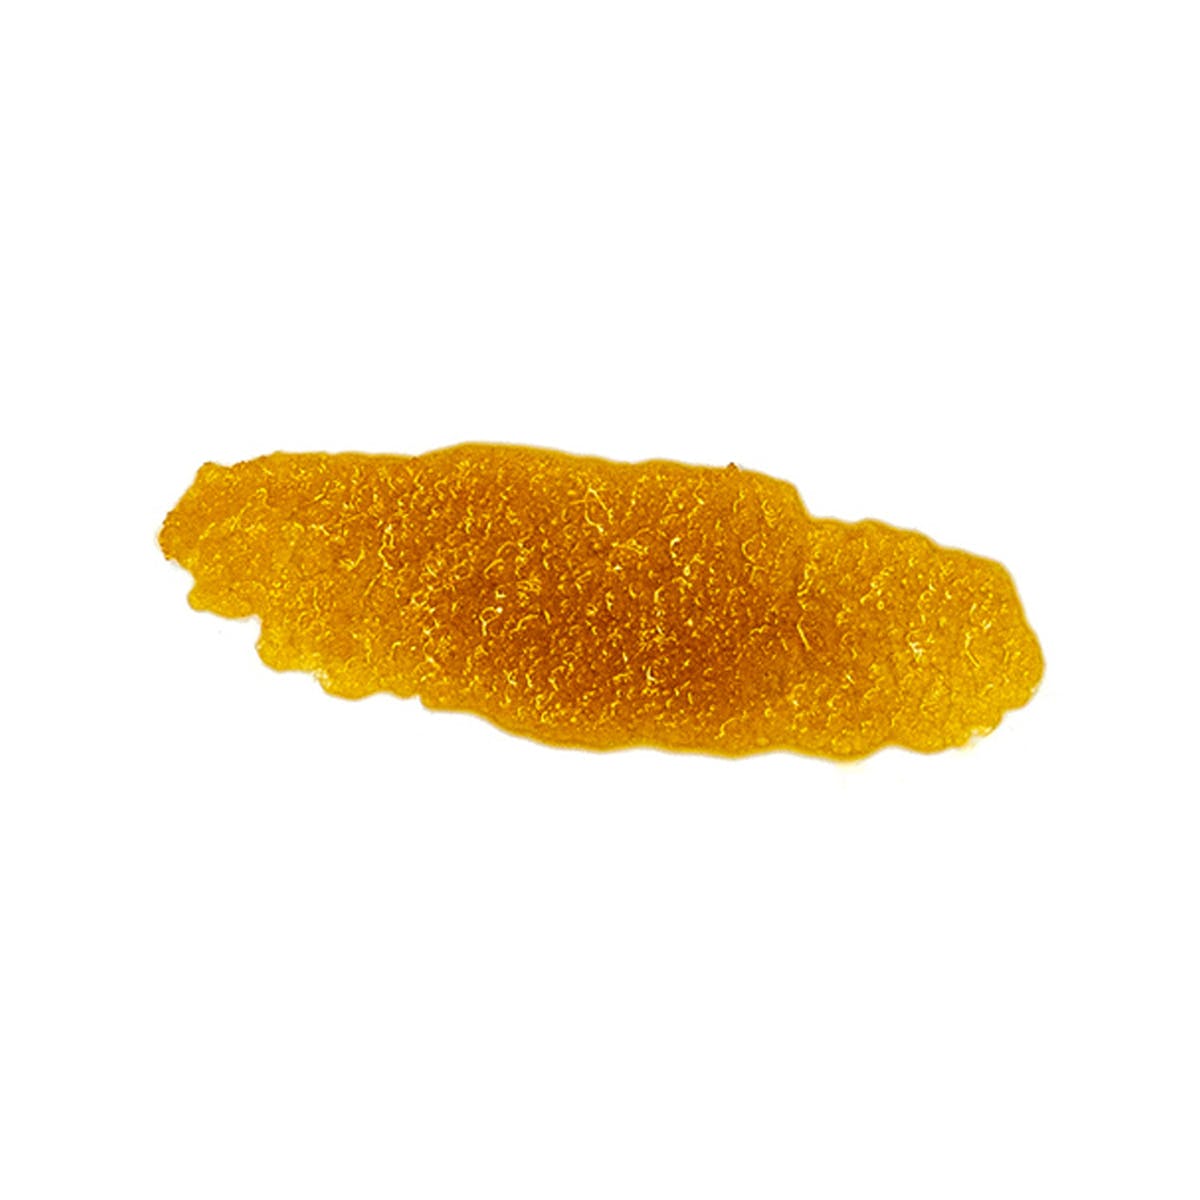 concentrate-loudpack-loudpack-live-resin-pure-og